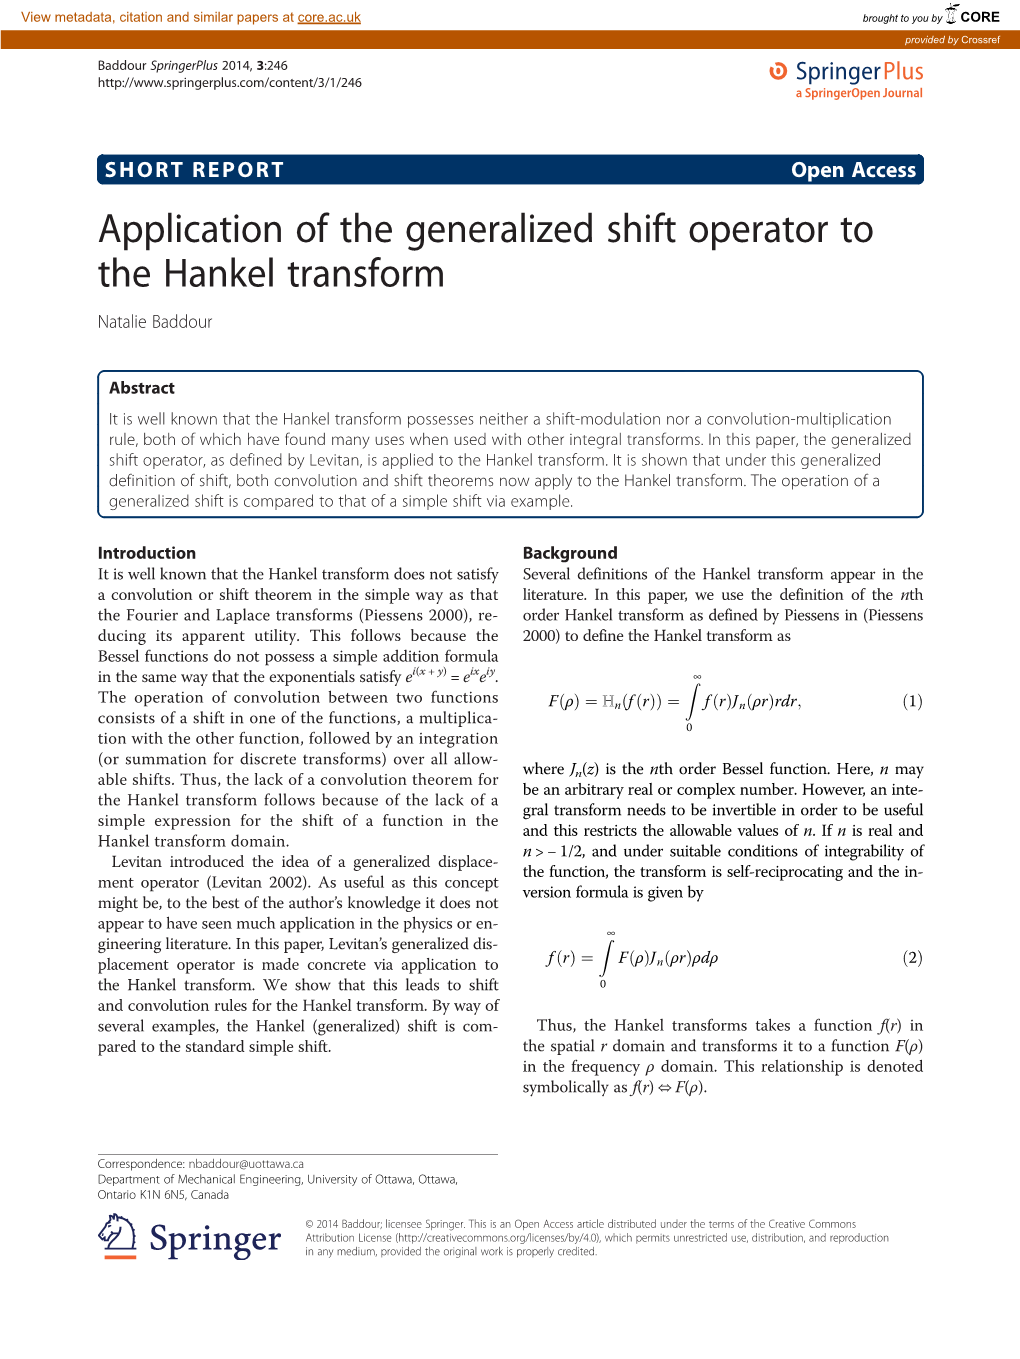 Application of the Generalized Shift Operator to the Hankel Transform Natalie Baddour